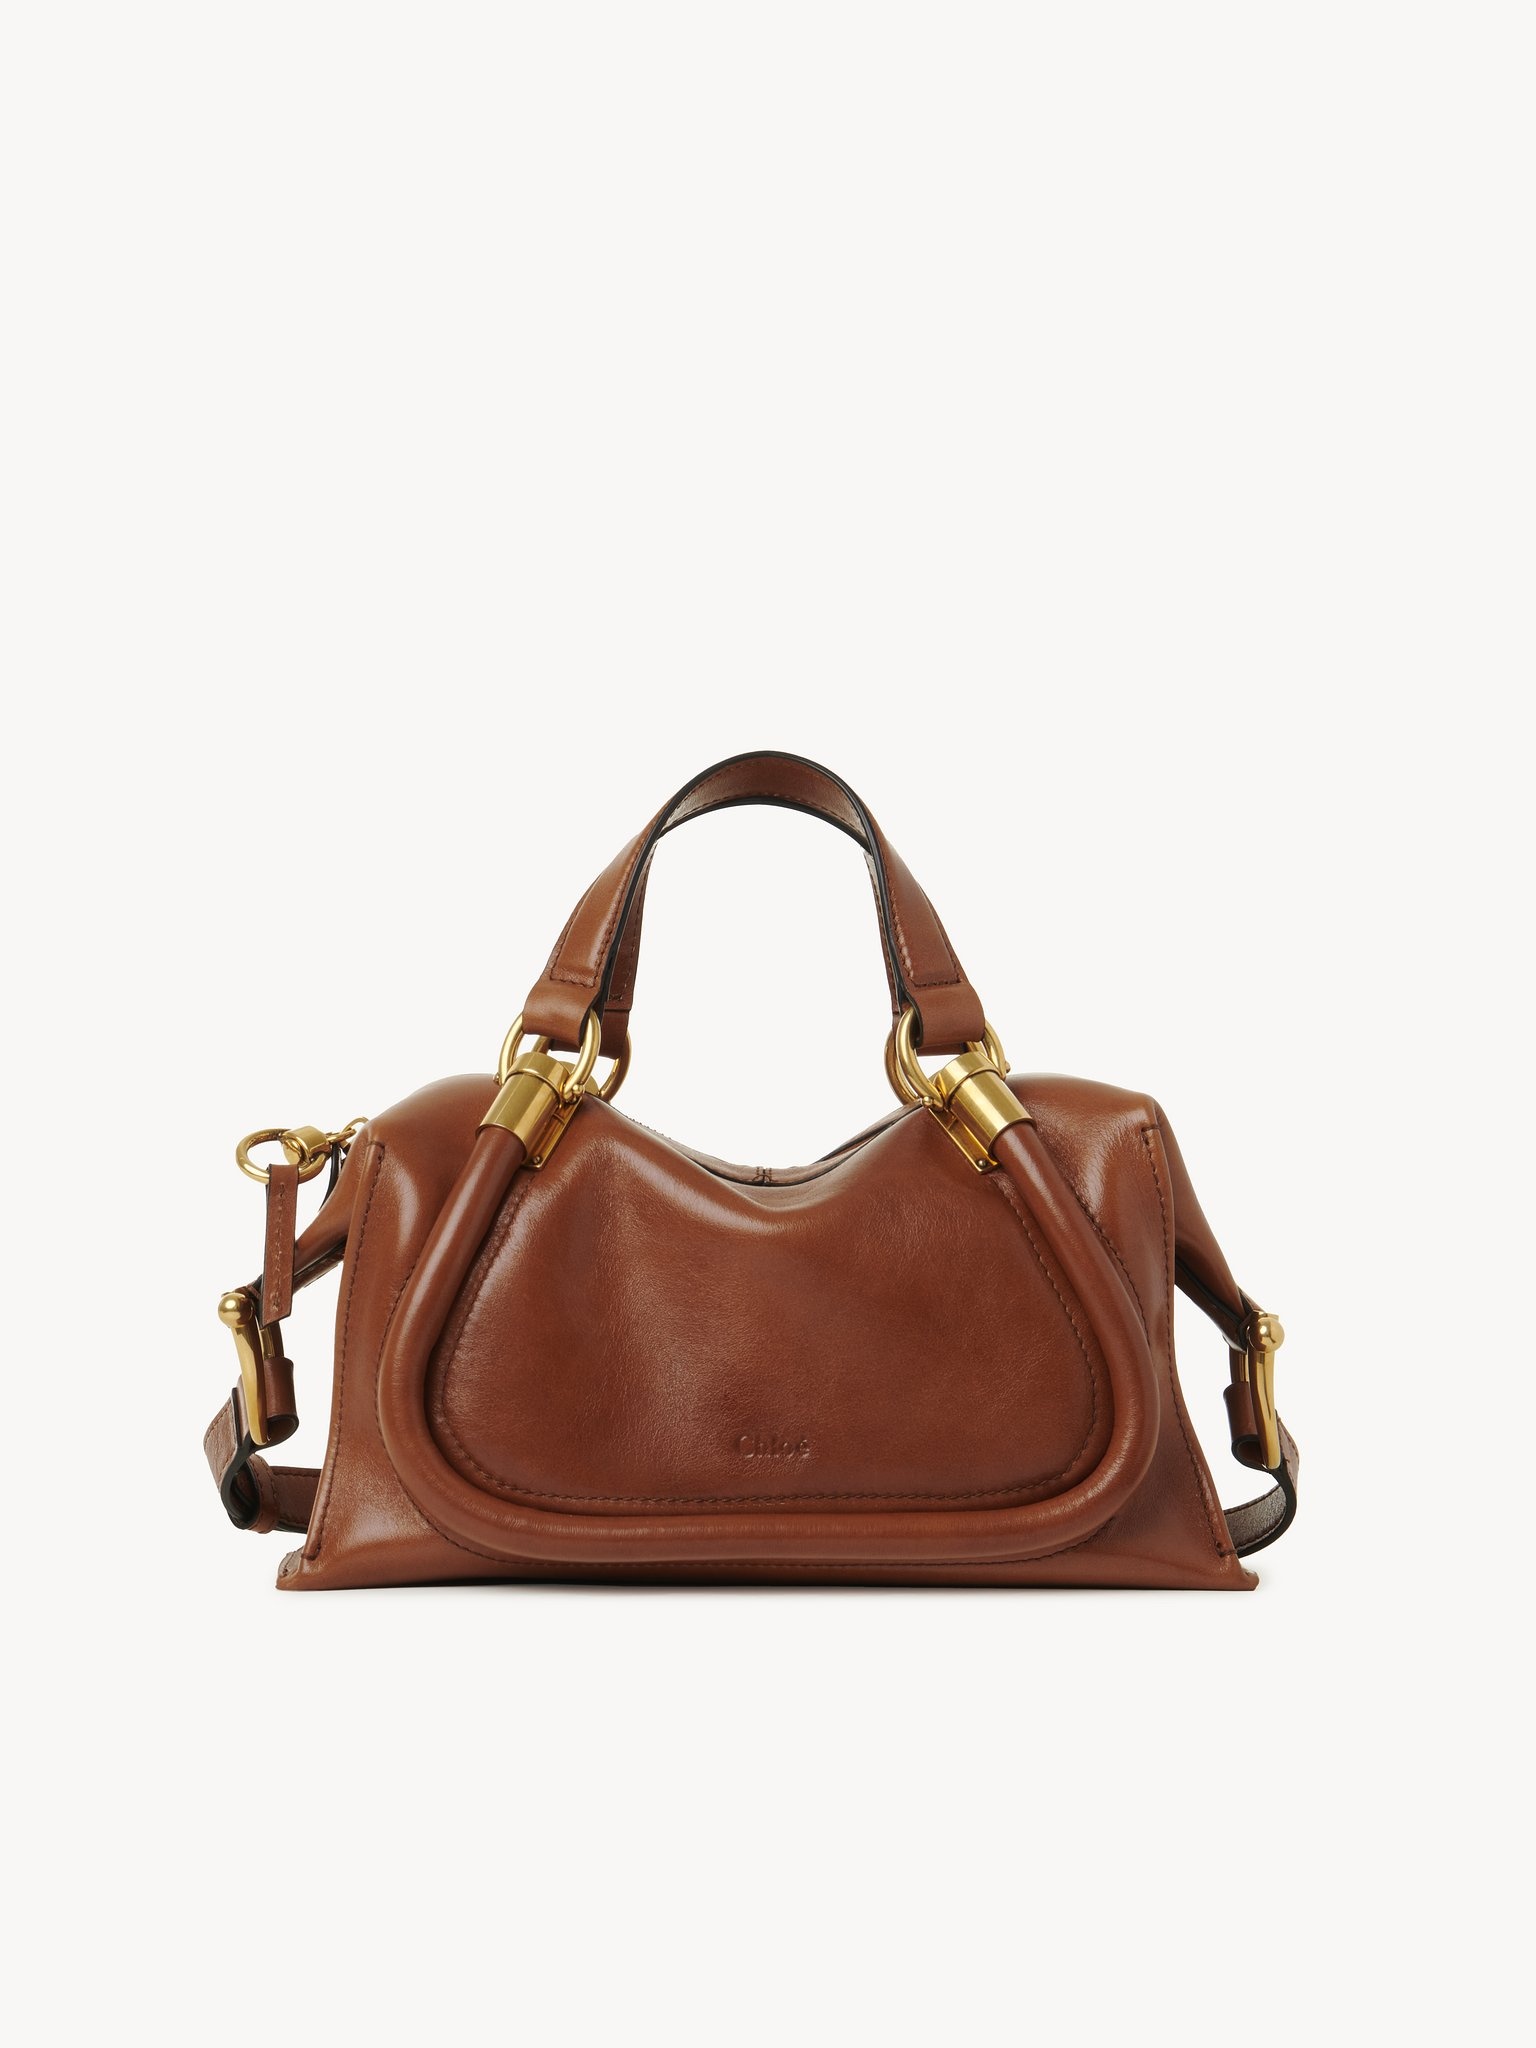 SMALL PARATY 24 BAG IN SOFT LEATHER - 1